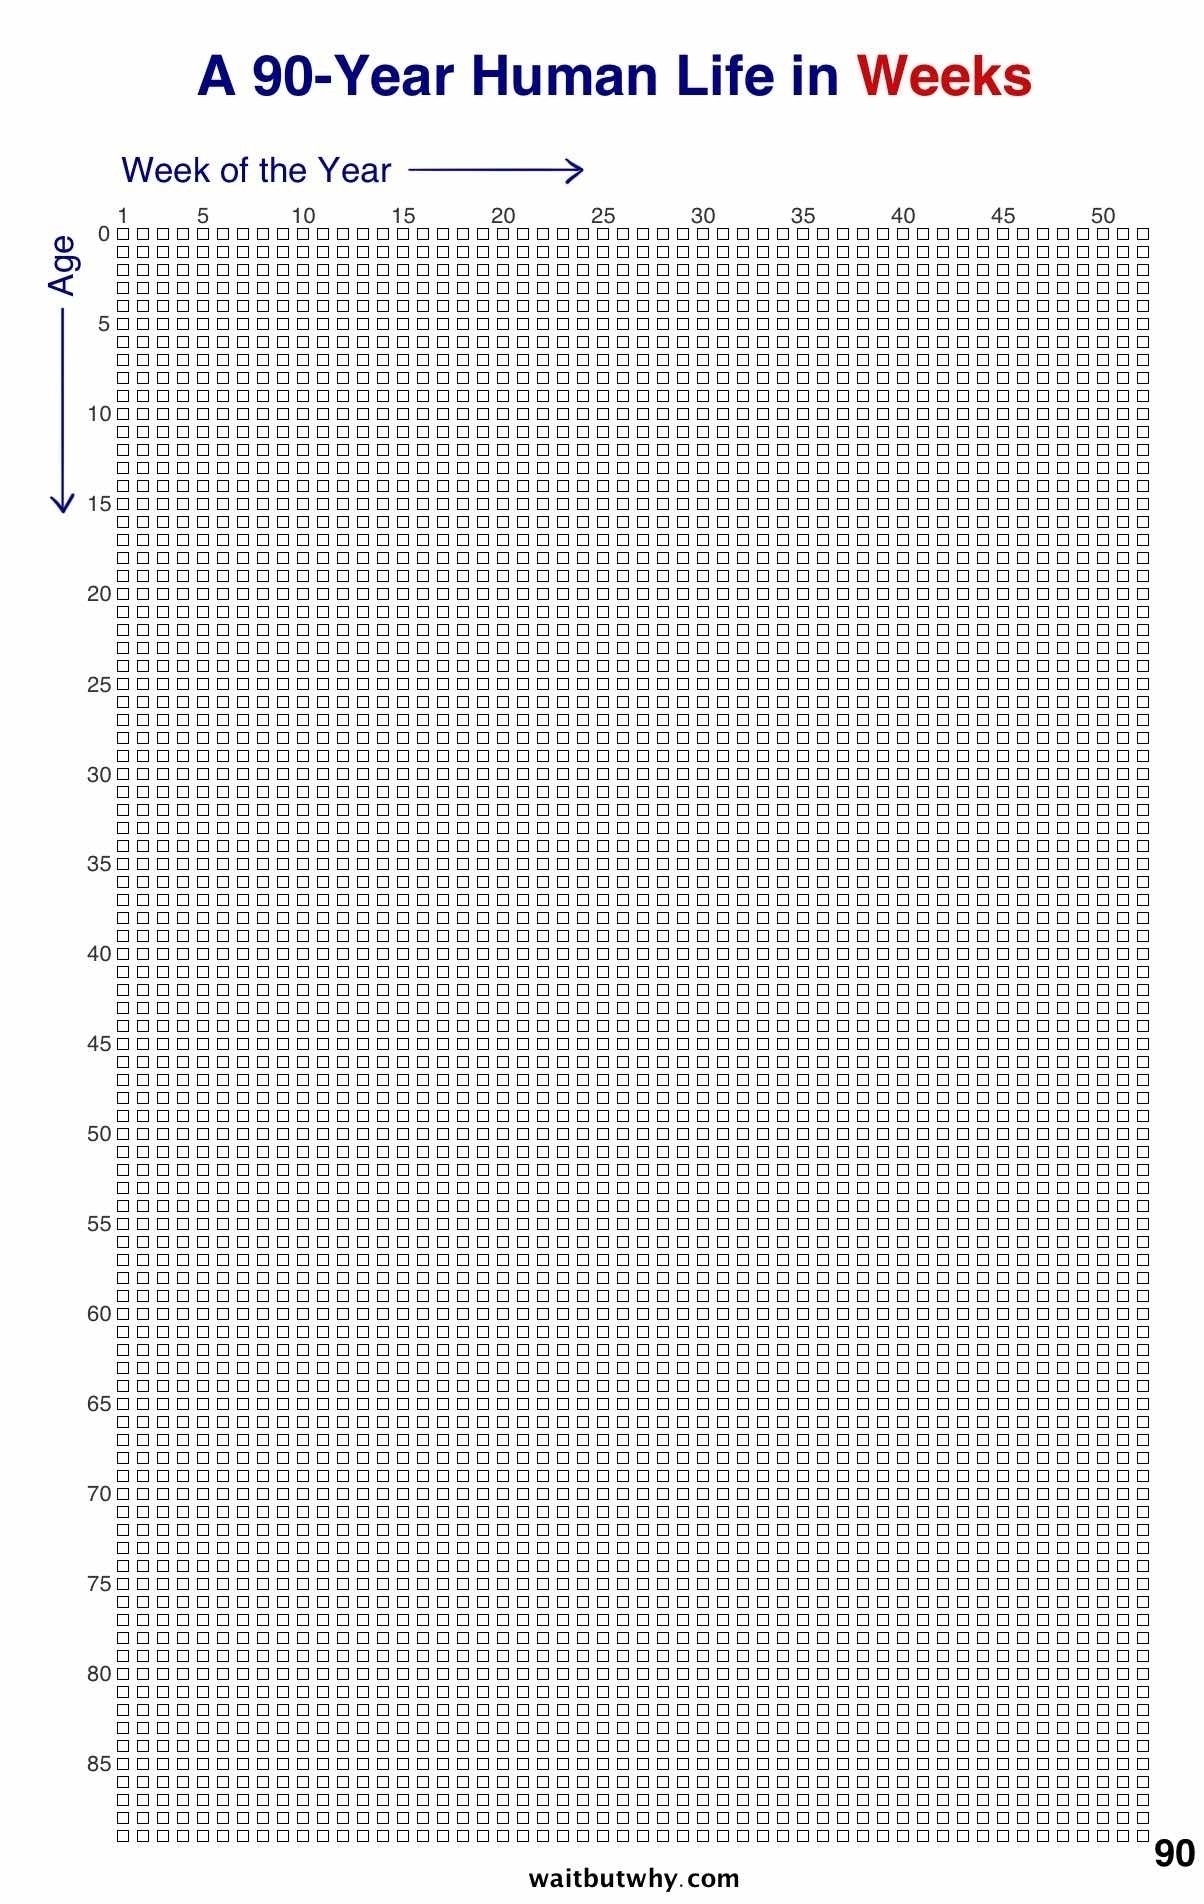 Image showing the number of weeks, represented with squares, within a lifespan of 90 years. Horizontally, 52 squares are shown, comprising a year. Vertically the age of a person or the number of years.